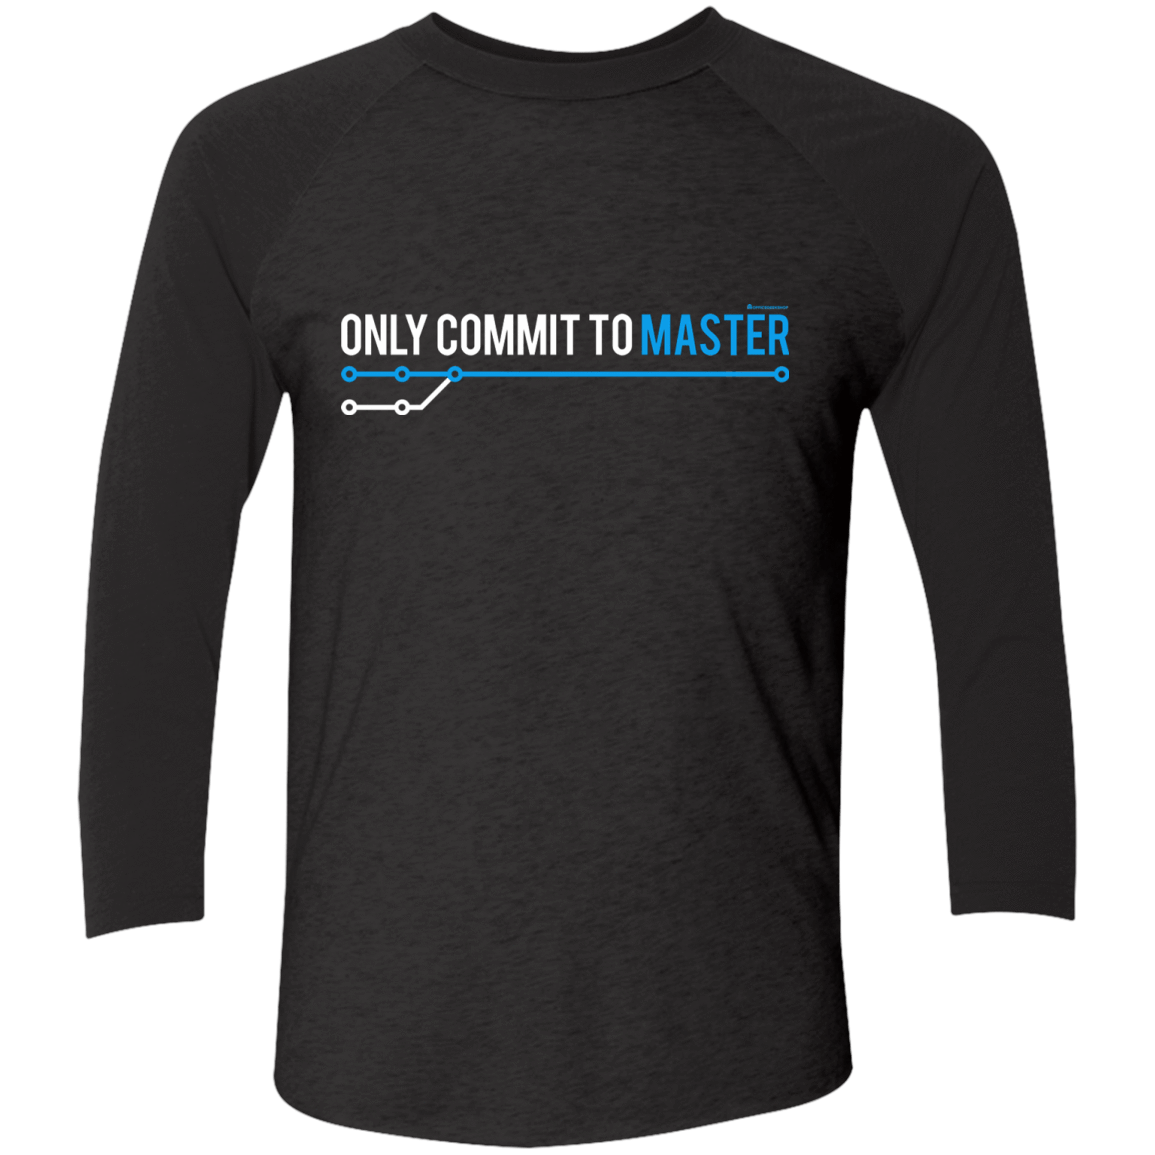 T-Shirts Vintage Black/Vintage Black / X-Small Only Commit To Master Men's Triblend 3/4 Sleeve